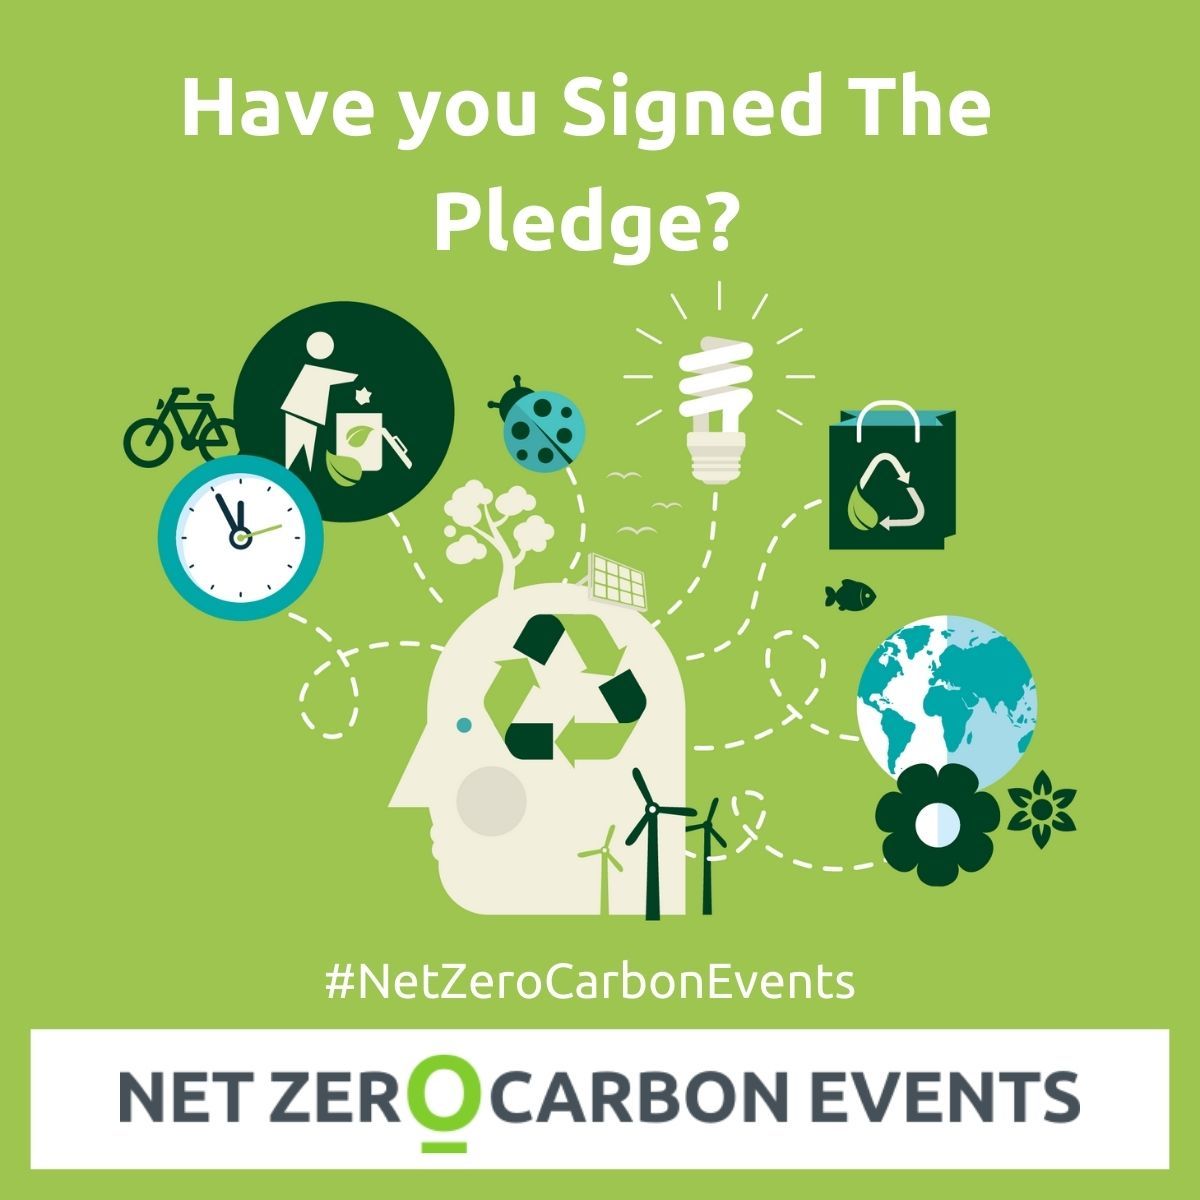 ICCA, as a founding partner of @NZCarbonEvents, is proud to wish everyone in the meetings and events industry a Happy #EarthDay! 🌱 Together we can work toward a more sustainable future with the goal of Net Zero Carbon Events by 2050. Sign the pledge 📝netzerocarbonevents.org/join-us/